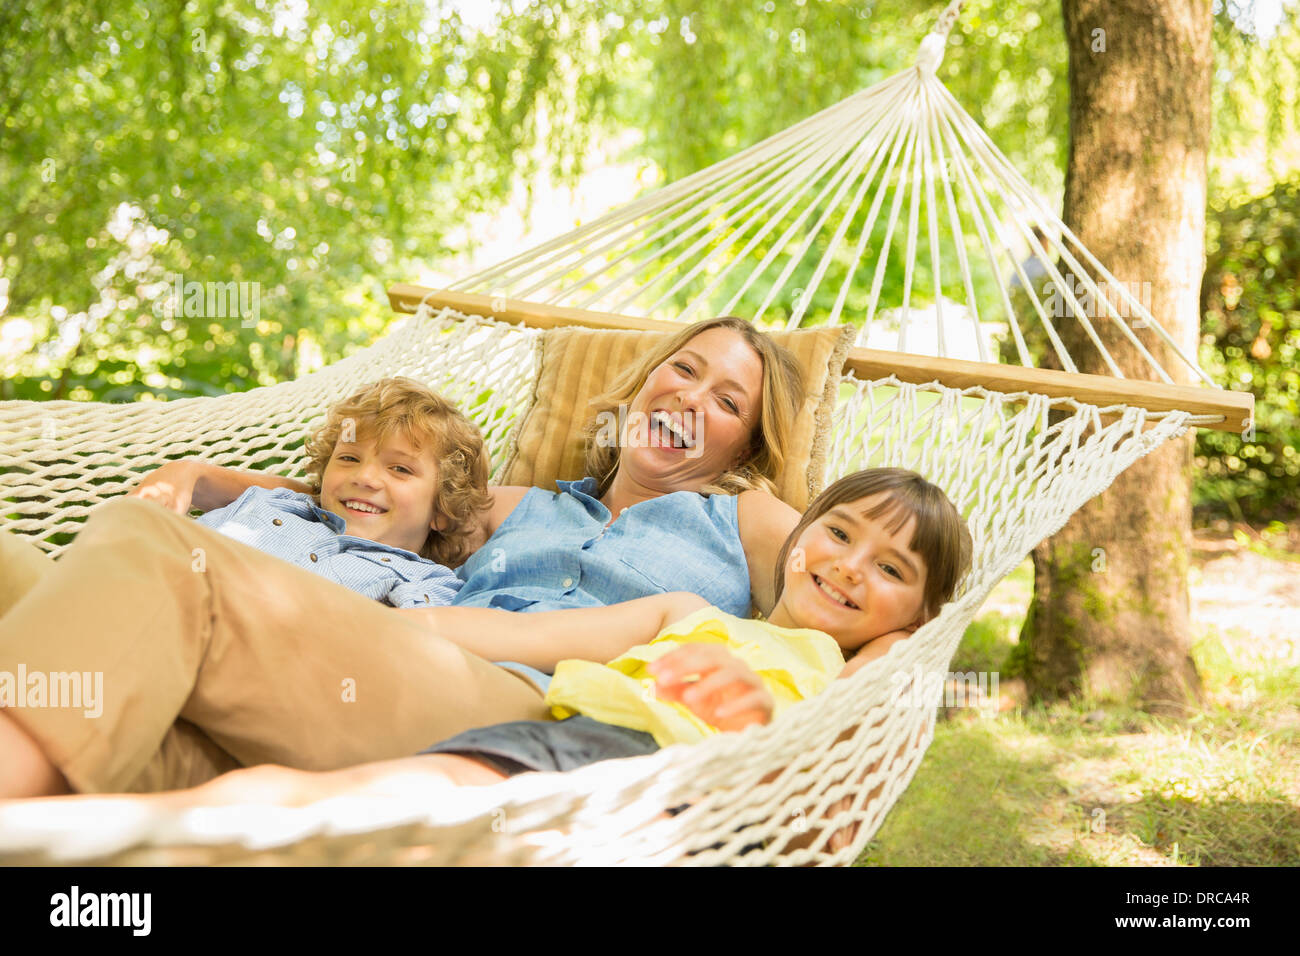 Mother and children relaxing in hammock Stock Photo